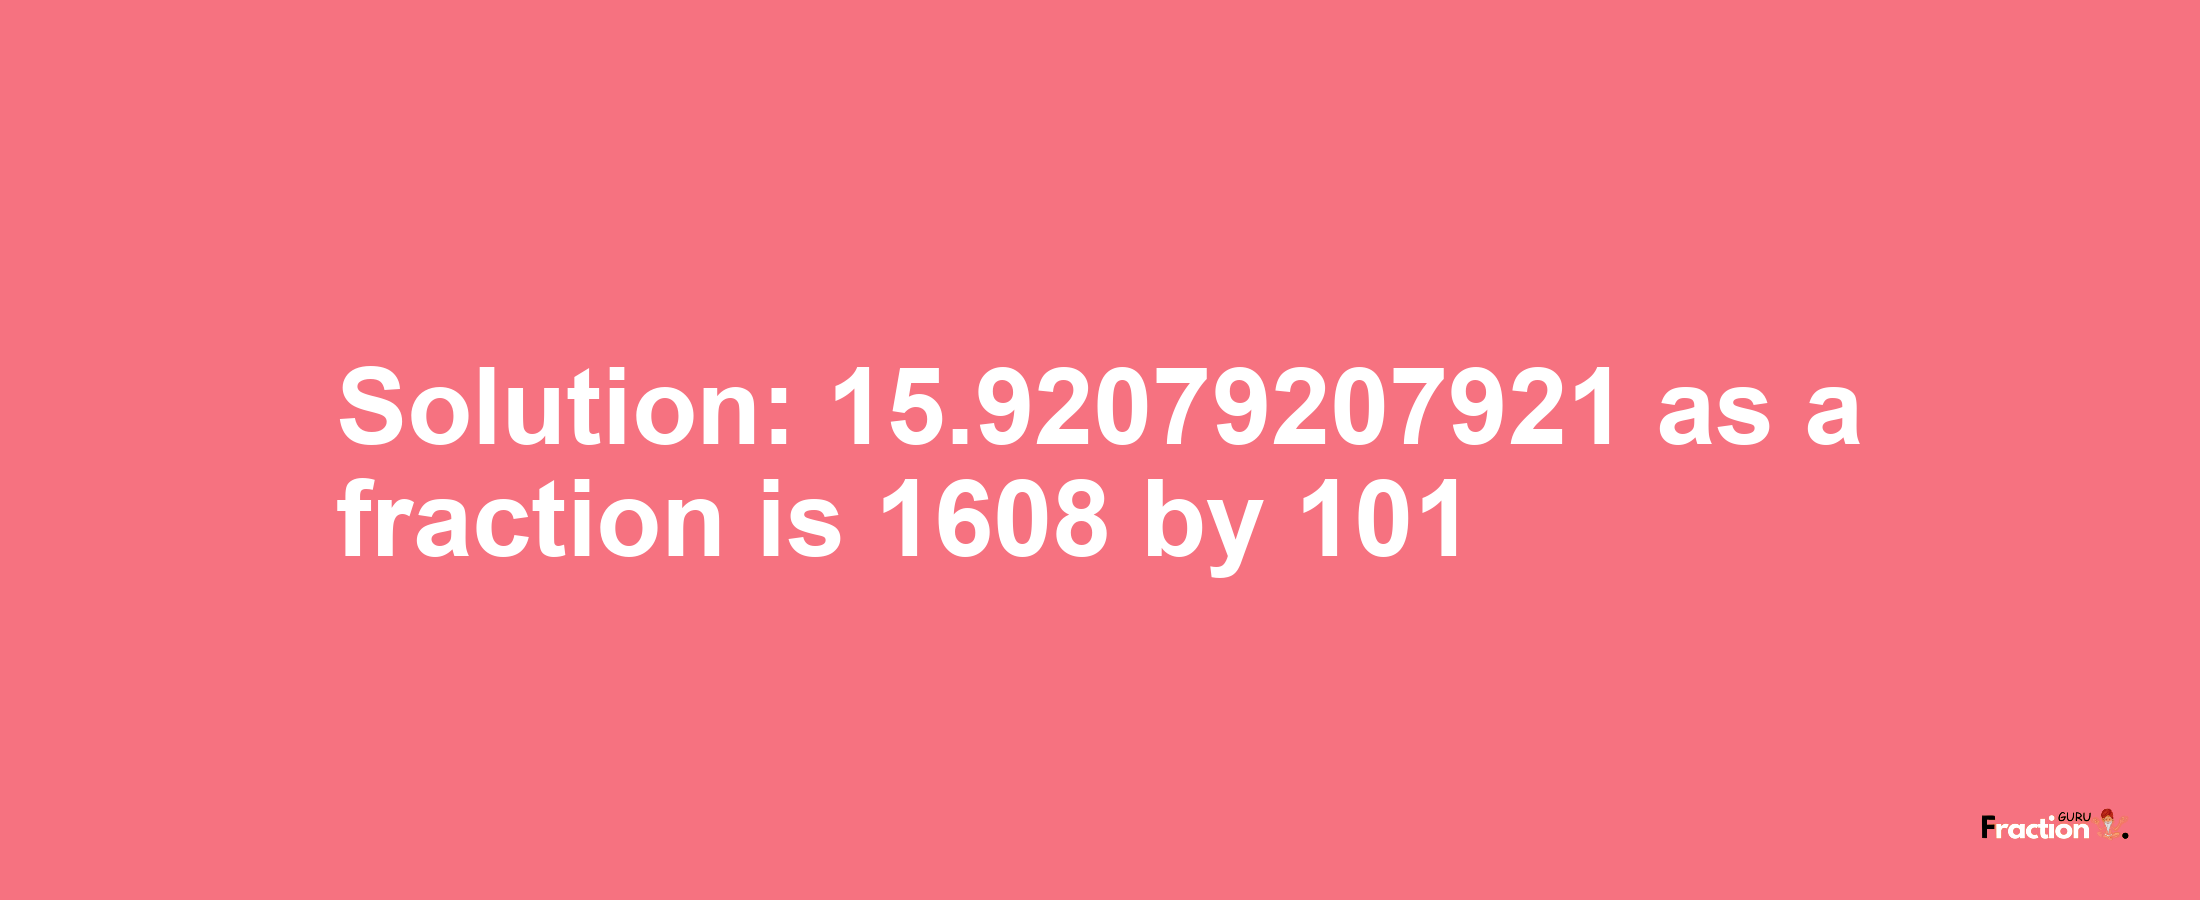 Solution:15.92079207921 as a fraction is 1608/101